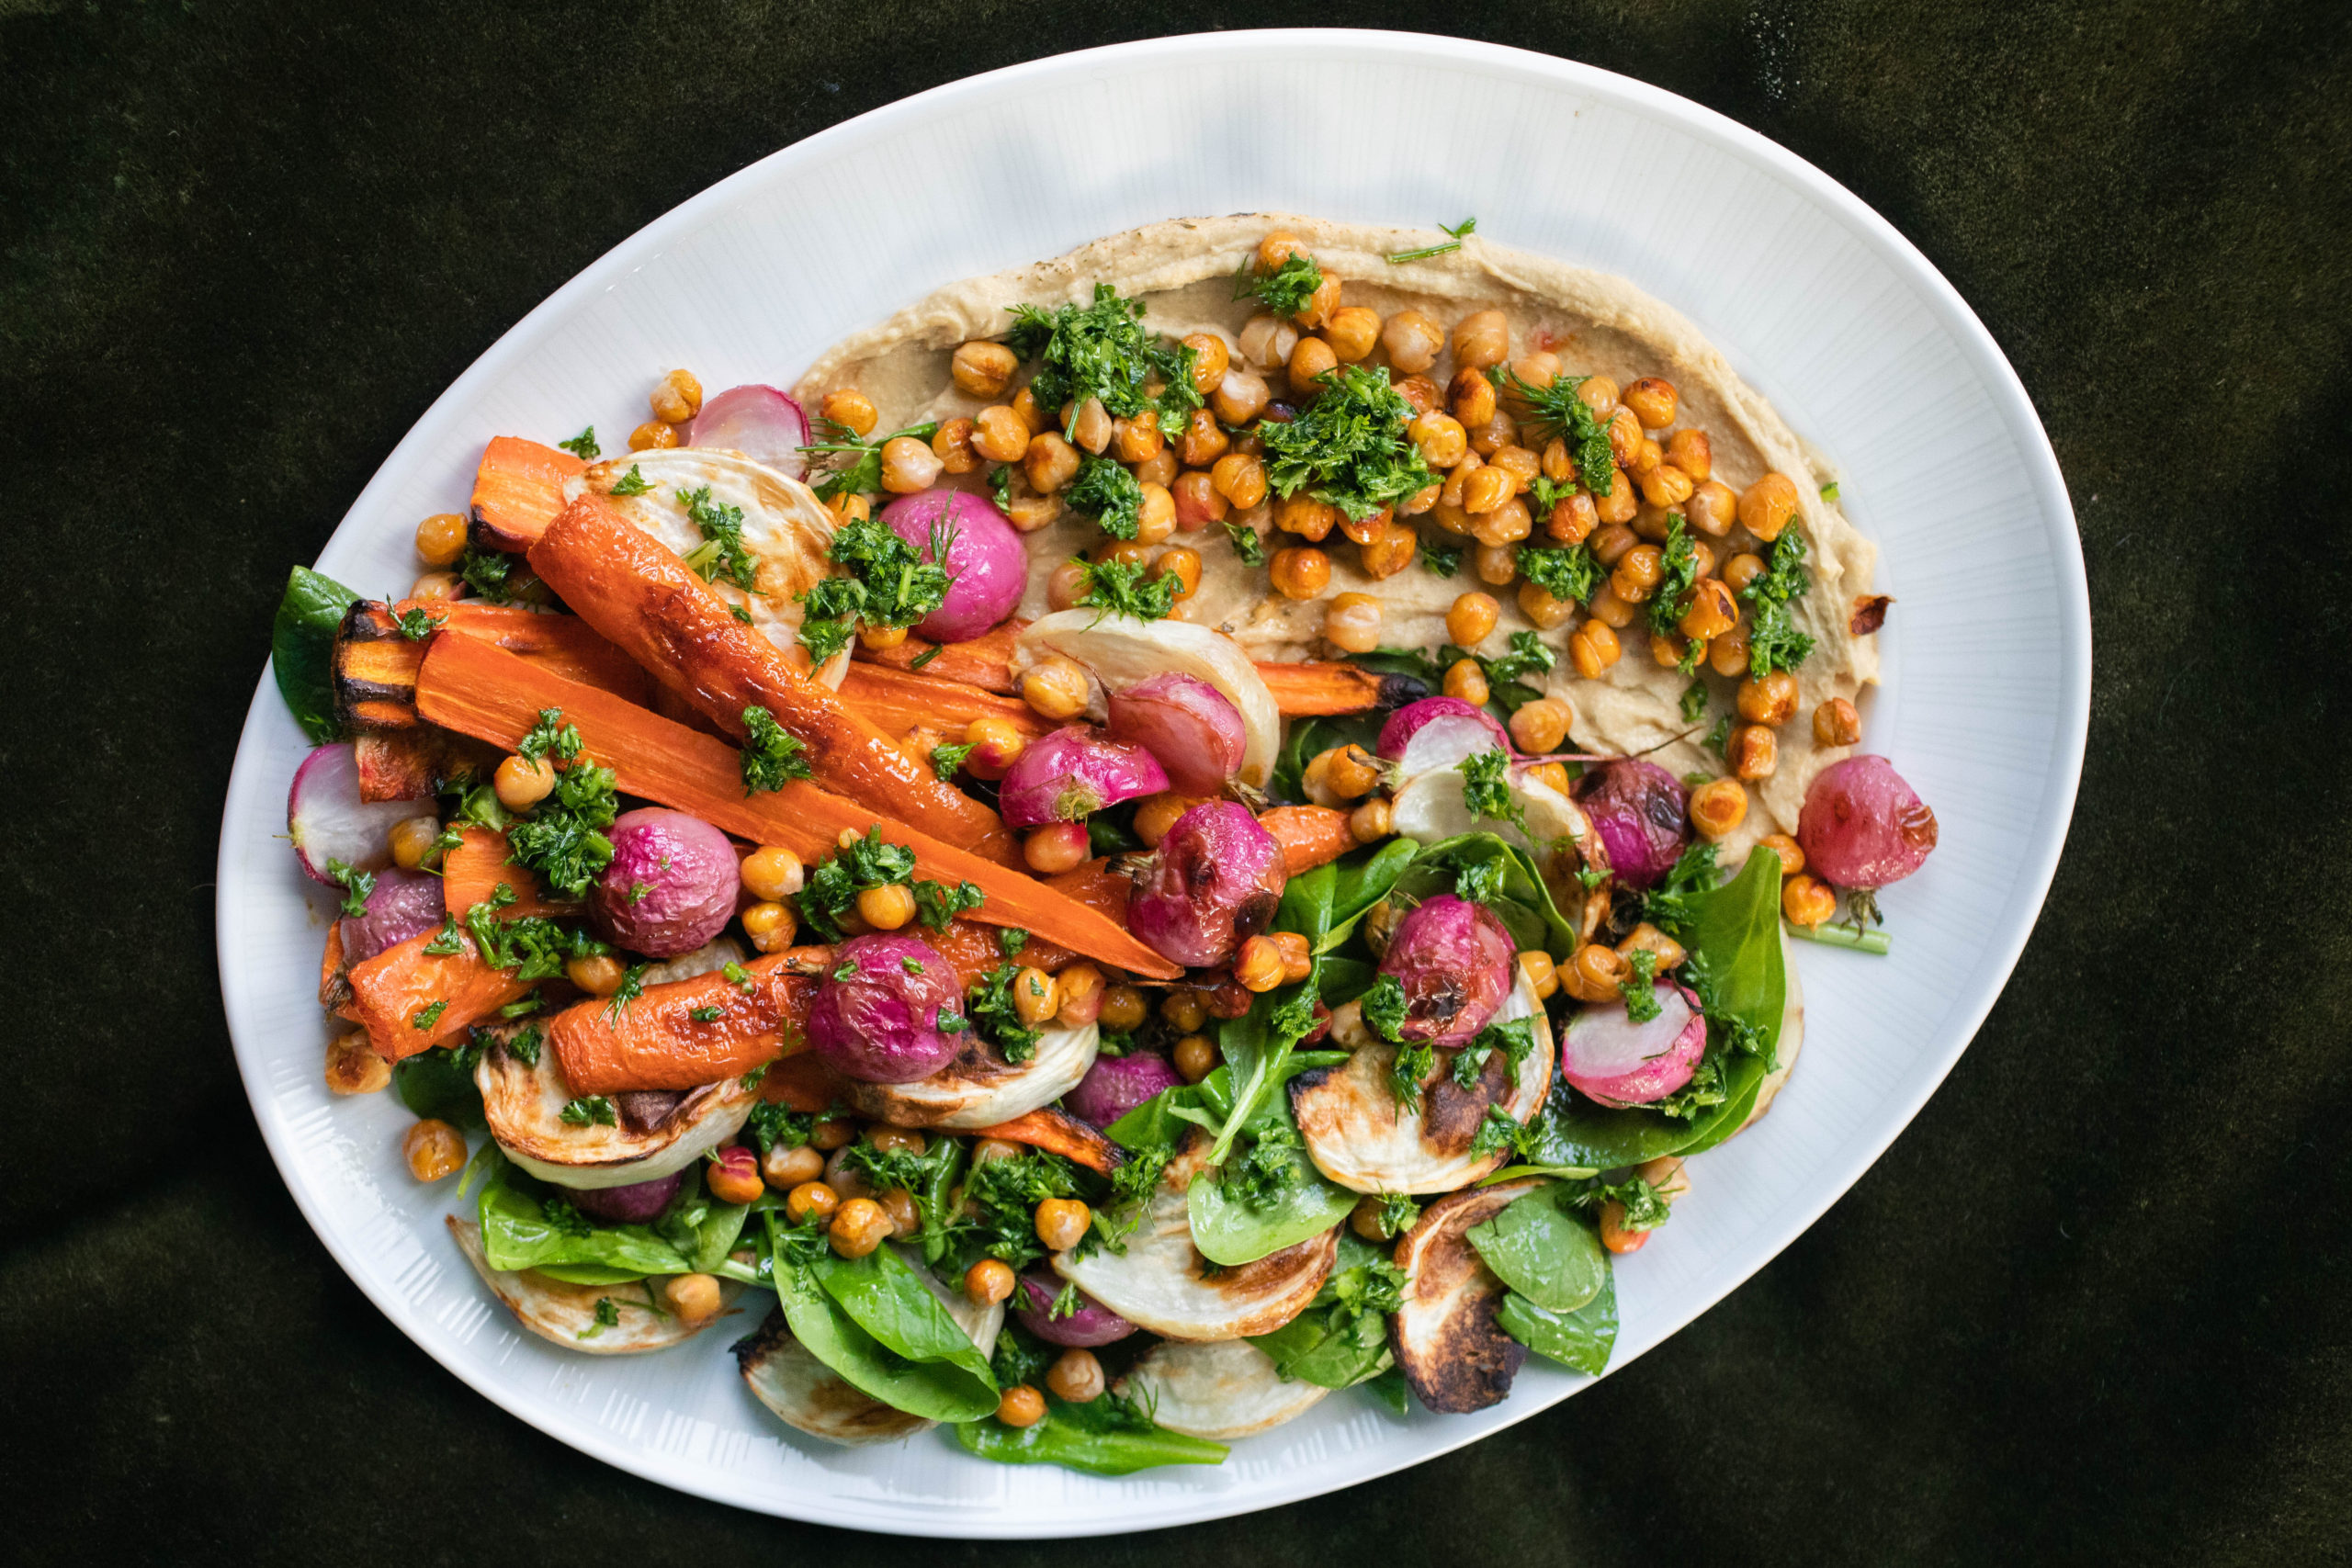 a spring salad of roasted carrots, radish, turnip, and chickpeas with spring greens, parsley sauce, and hummus